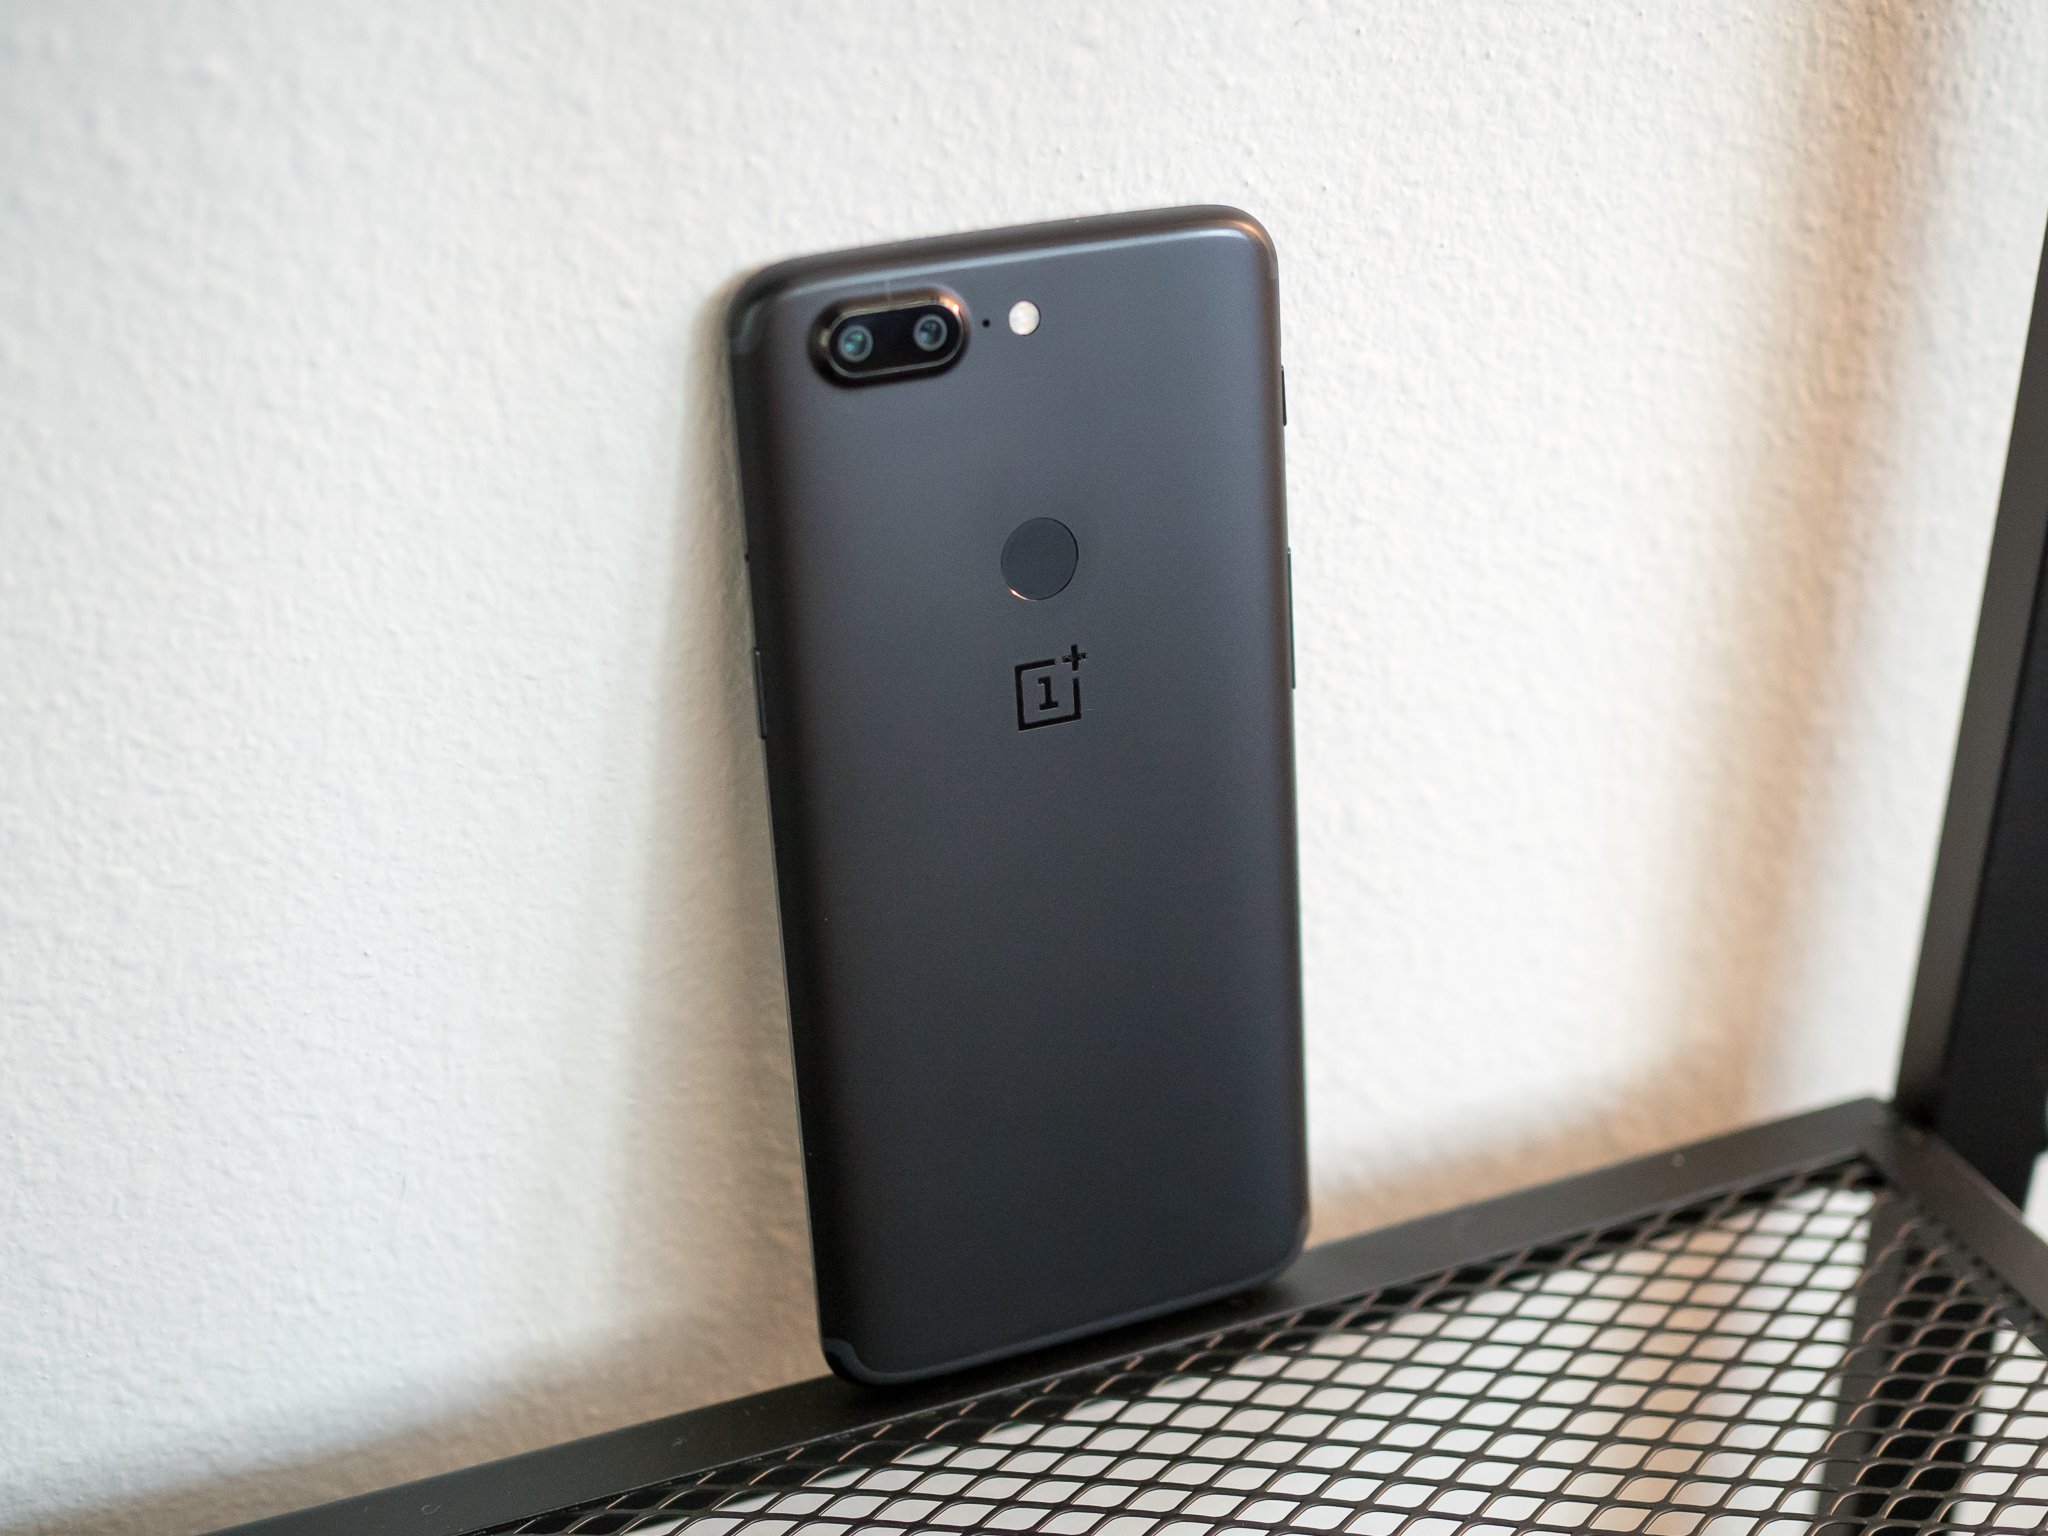 OnePlus 5T and OnePlus 5